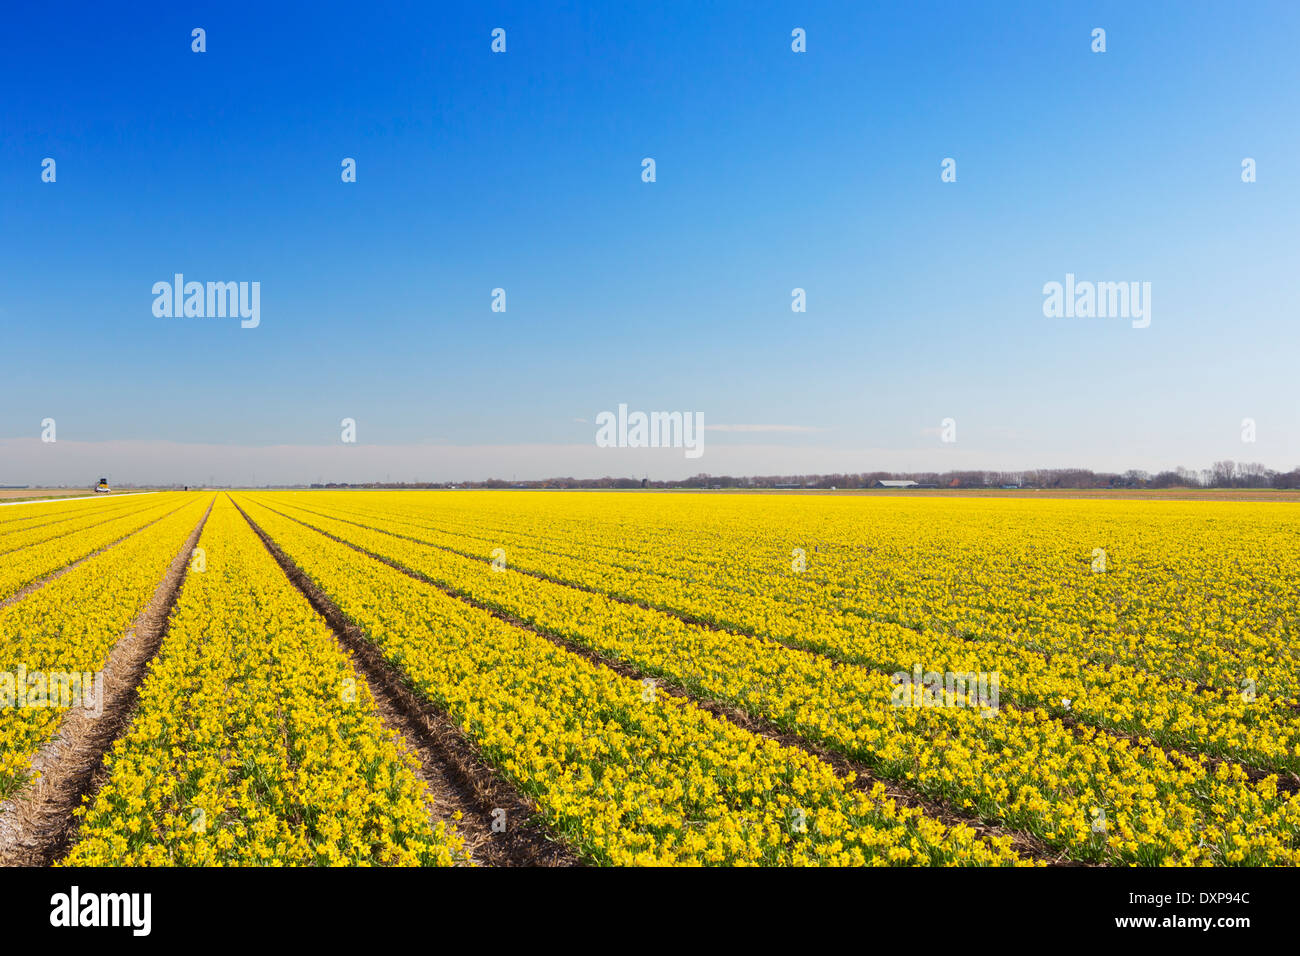 Endless rows of daffodil flowers in The Netherlands on a bright and sunny day Stock Photo